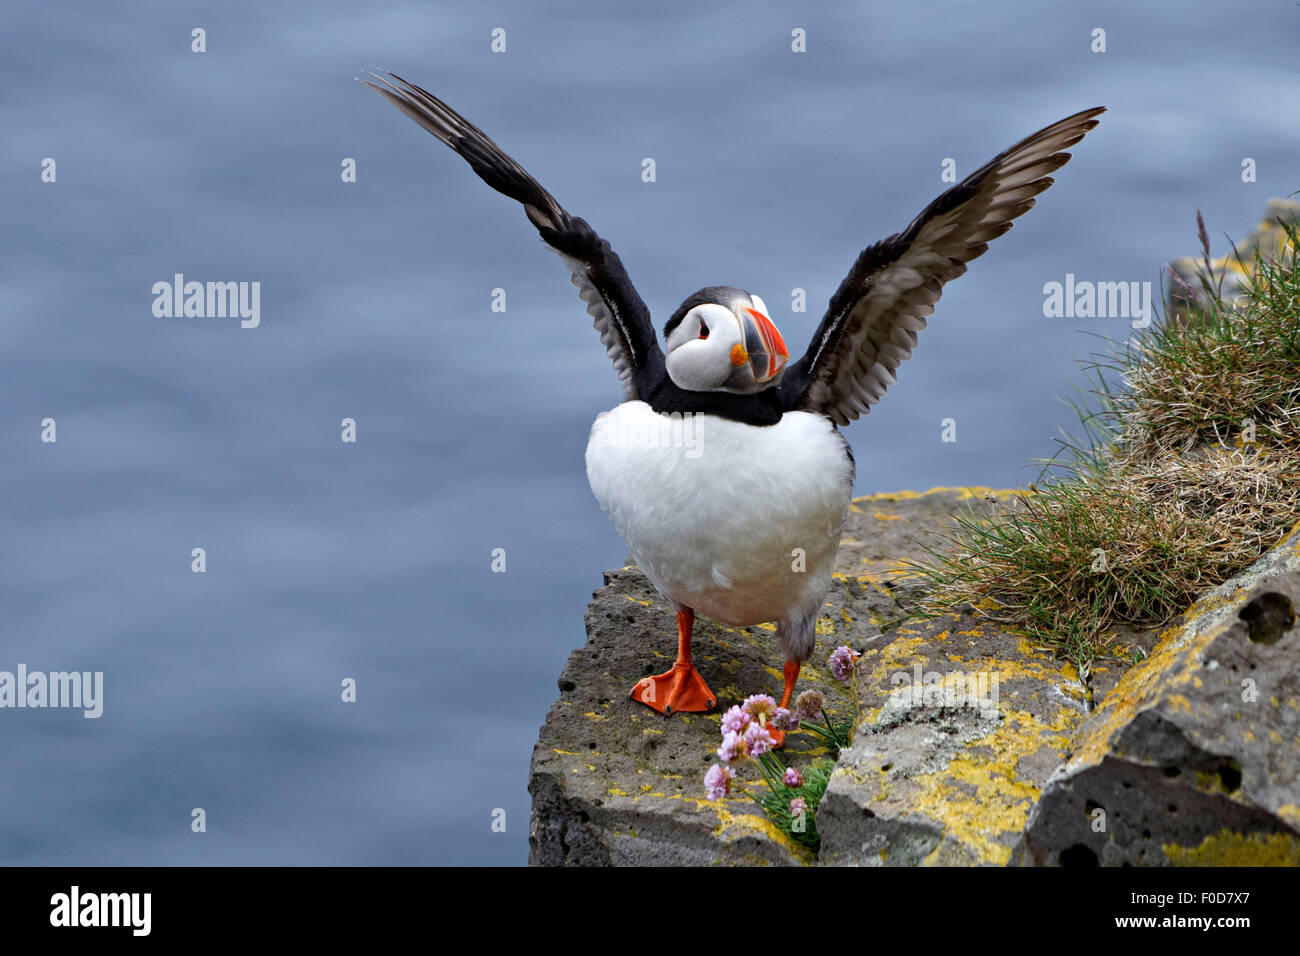 Puffin Bird (Fratercula arctica) perched on cliff rocks with open wings, Westfjords, Iceland, Europe. Stock Photo